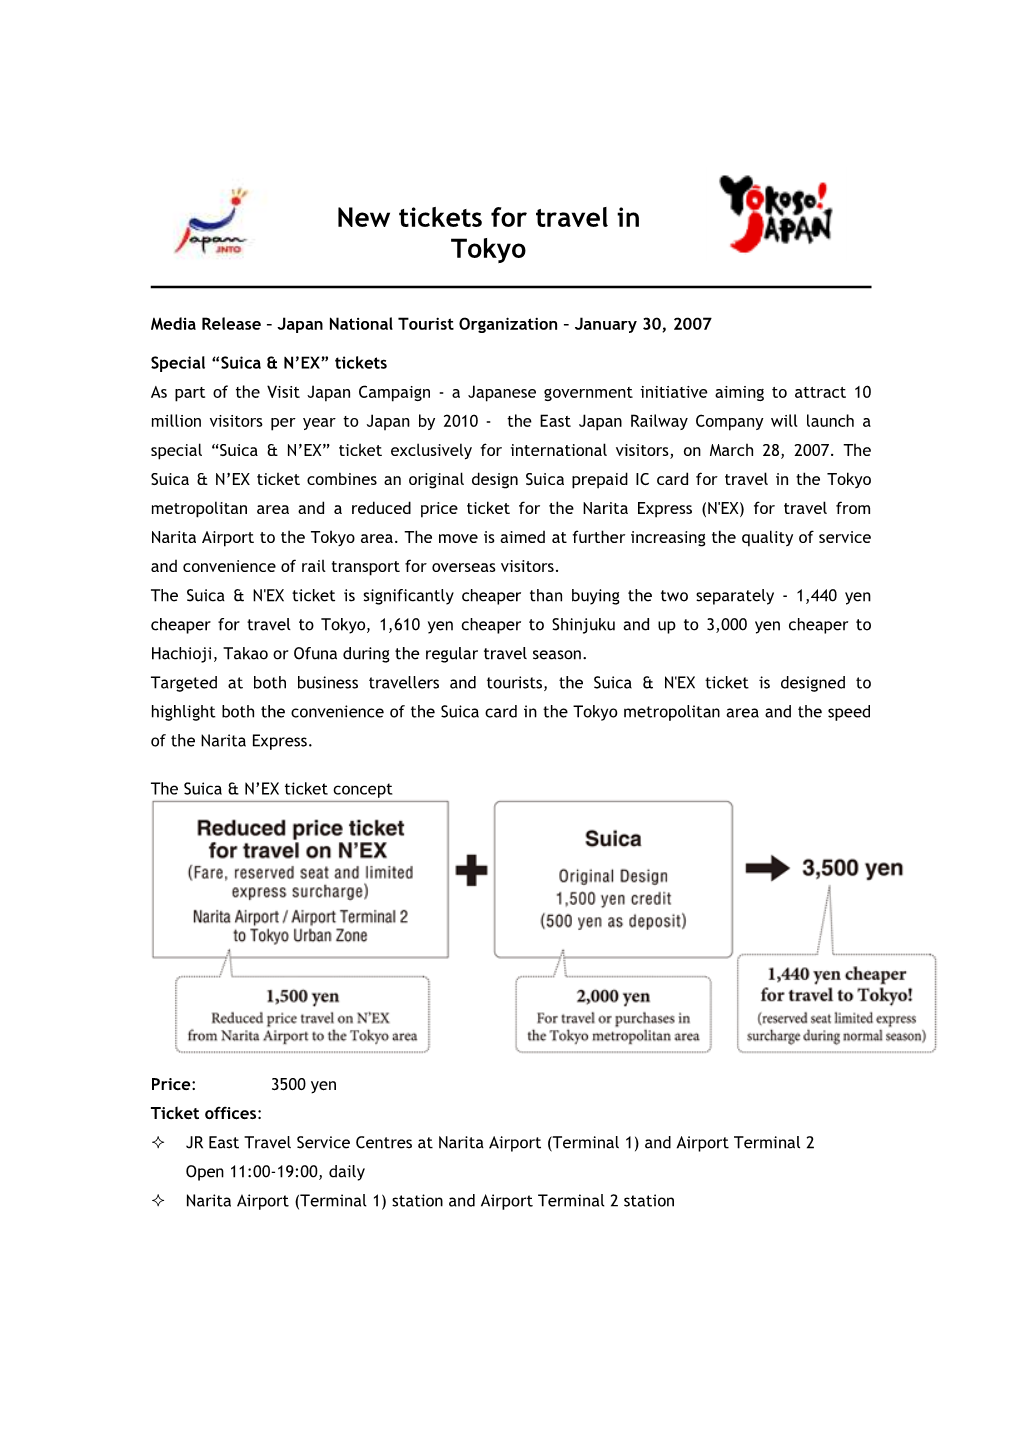 New Tickets for Travel in Tokyo